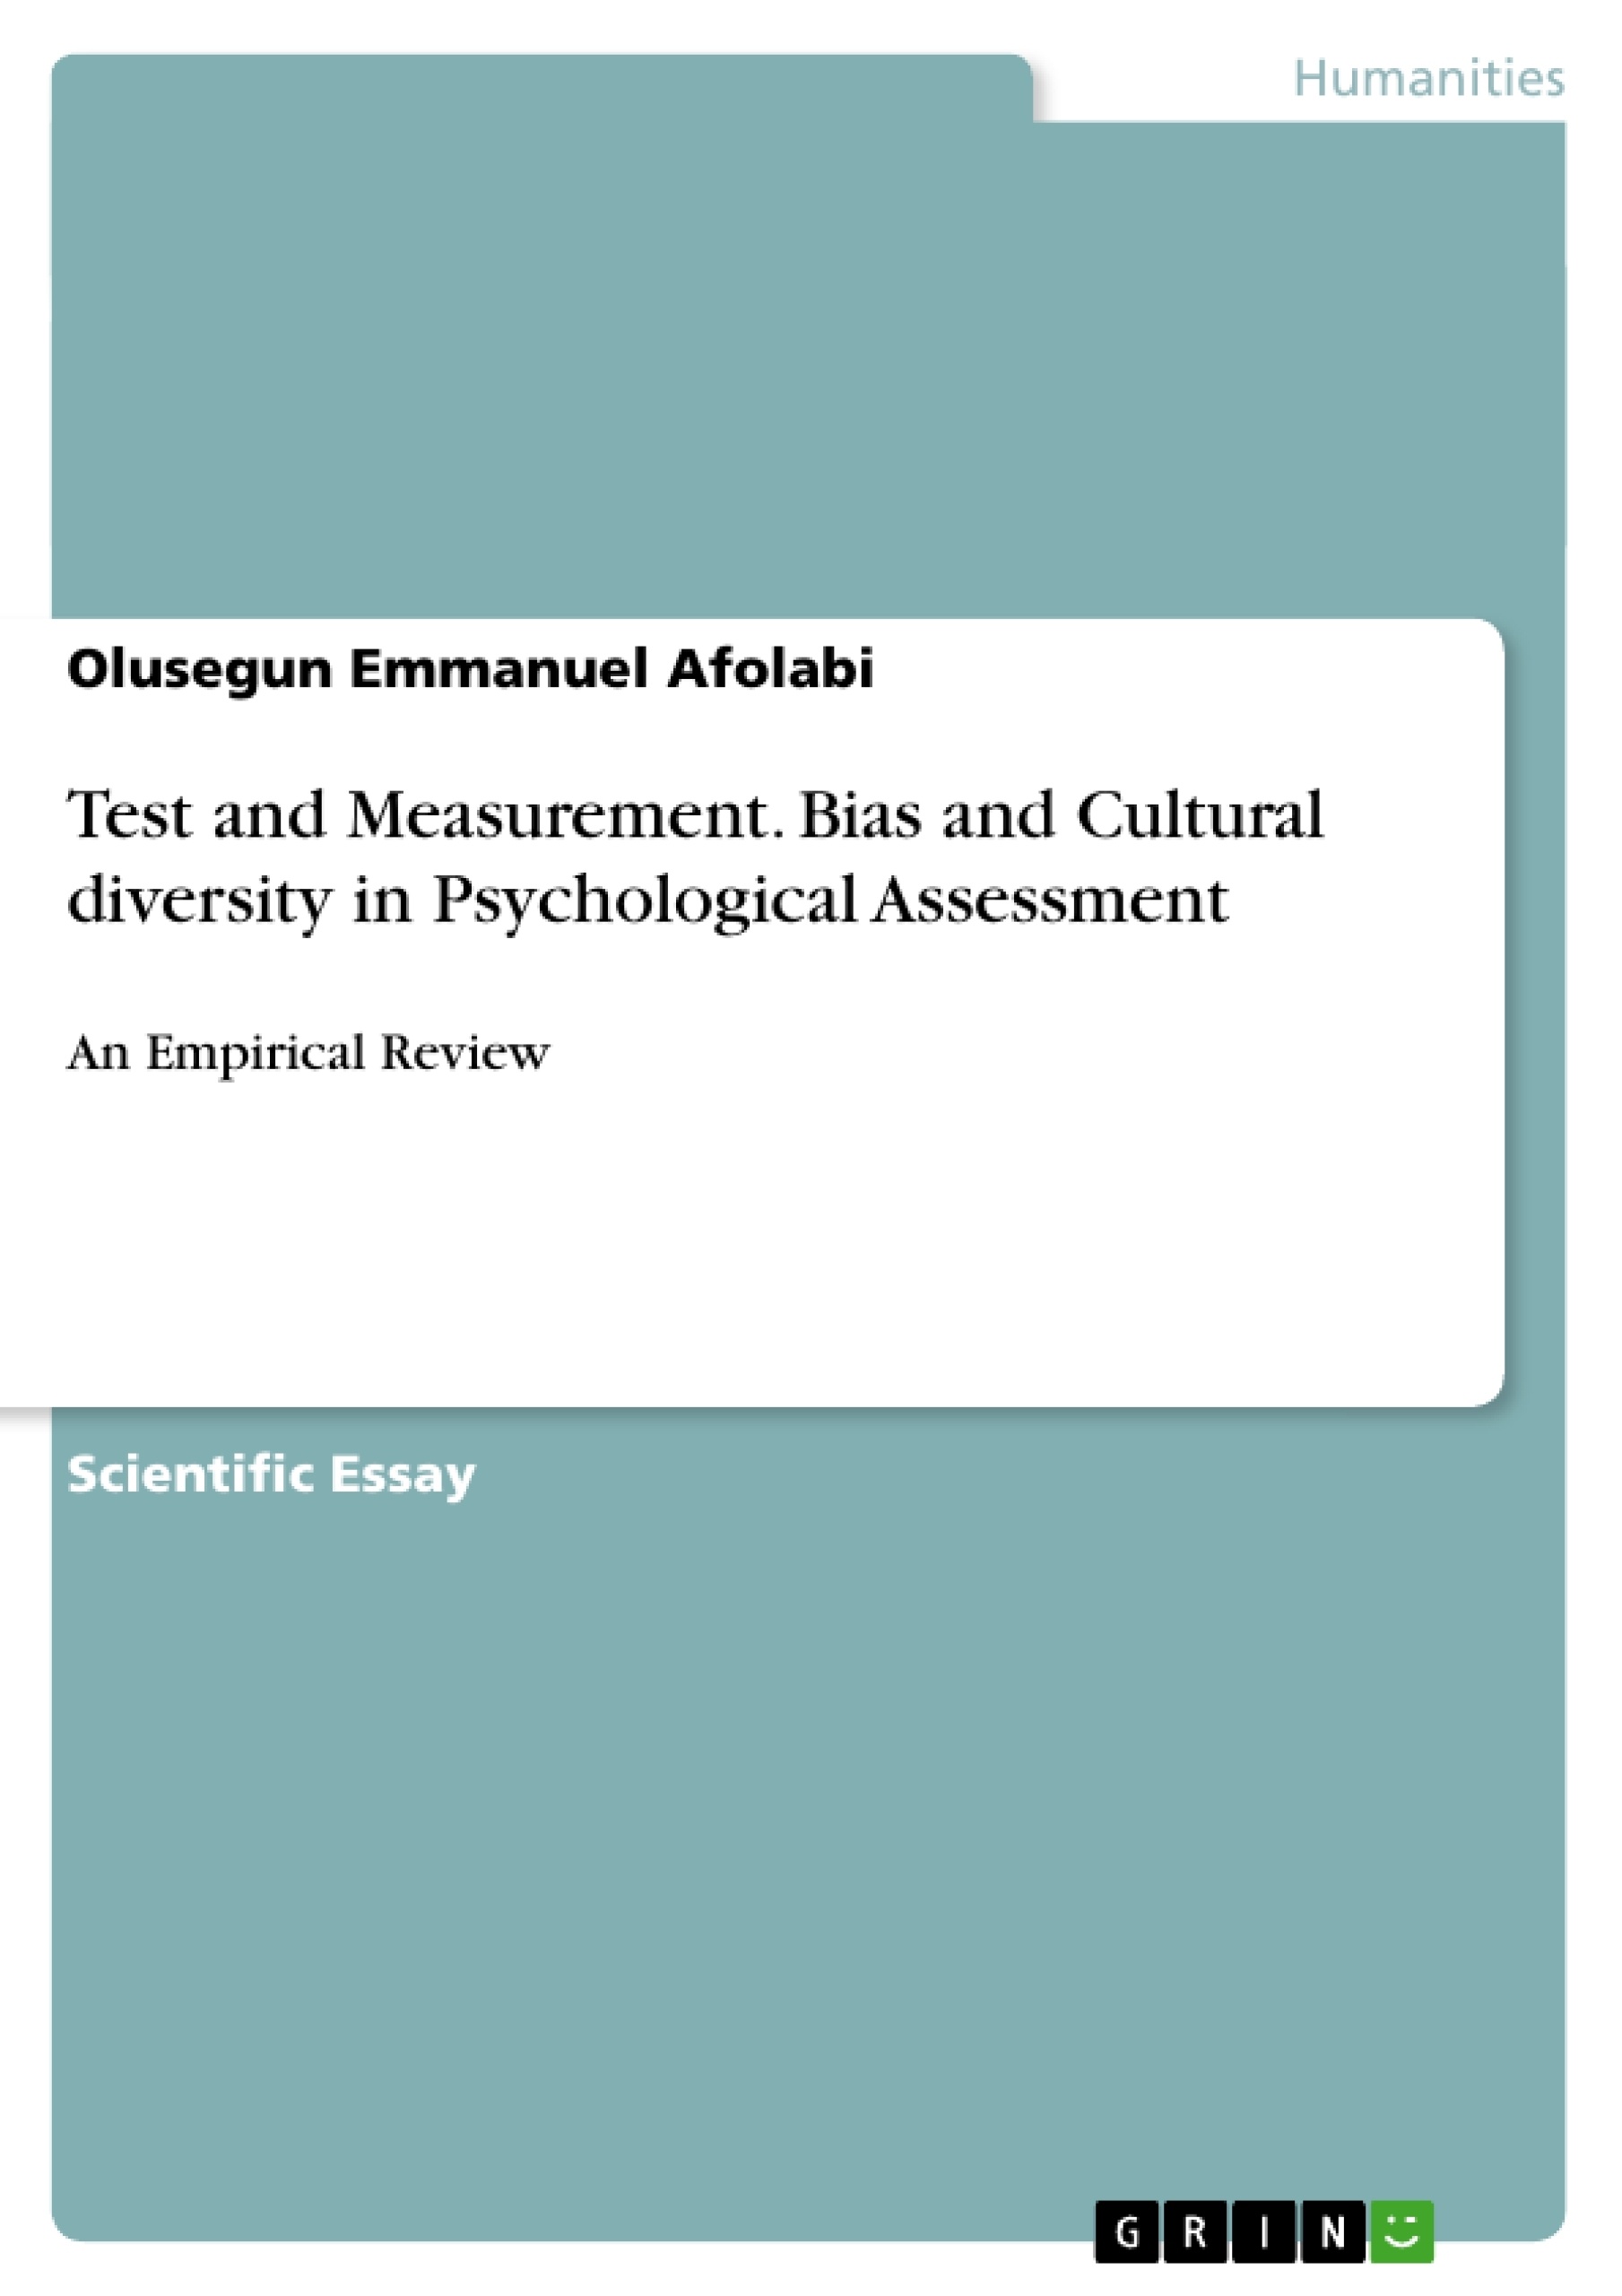 Title: Test and Measurement. Bias and Cultural diversity in Psychological Assessment